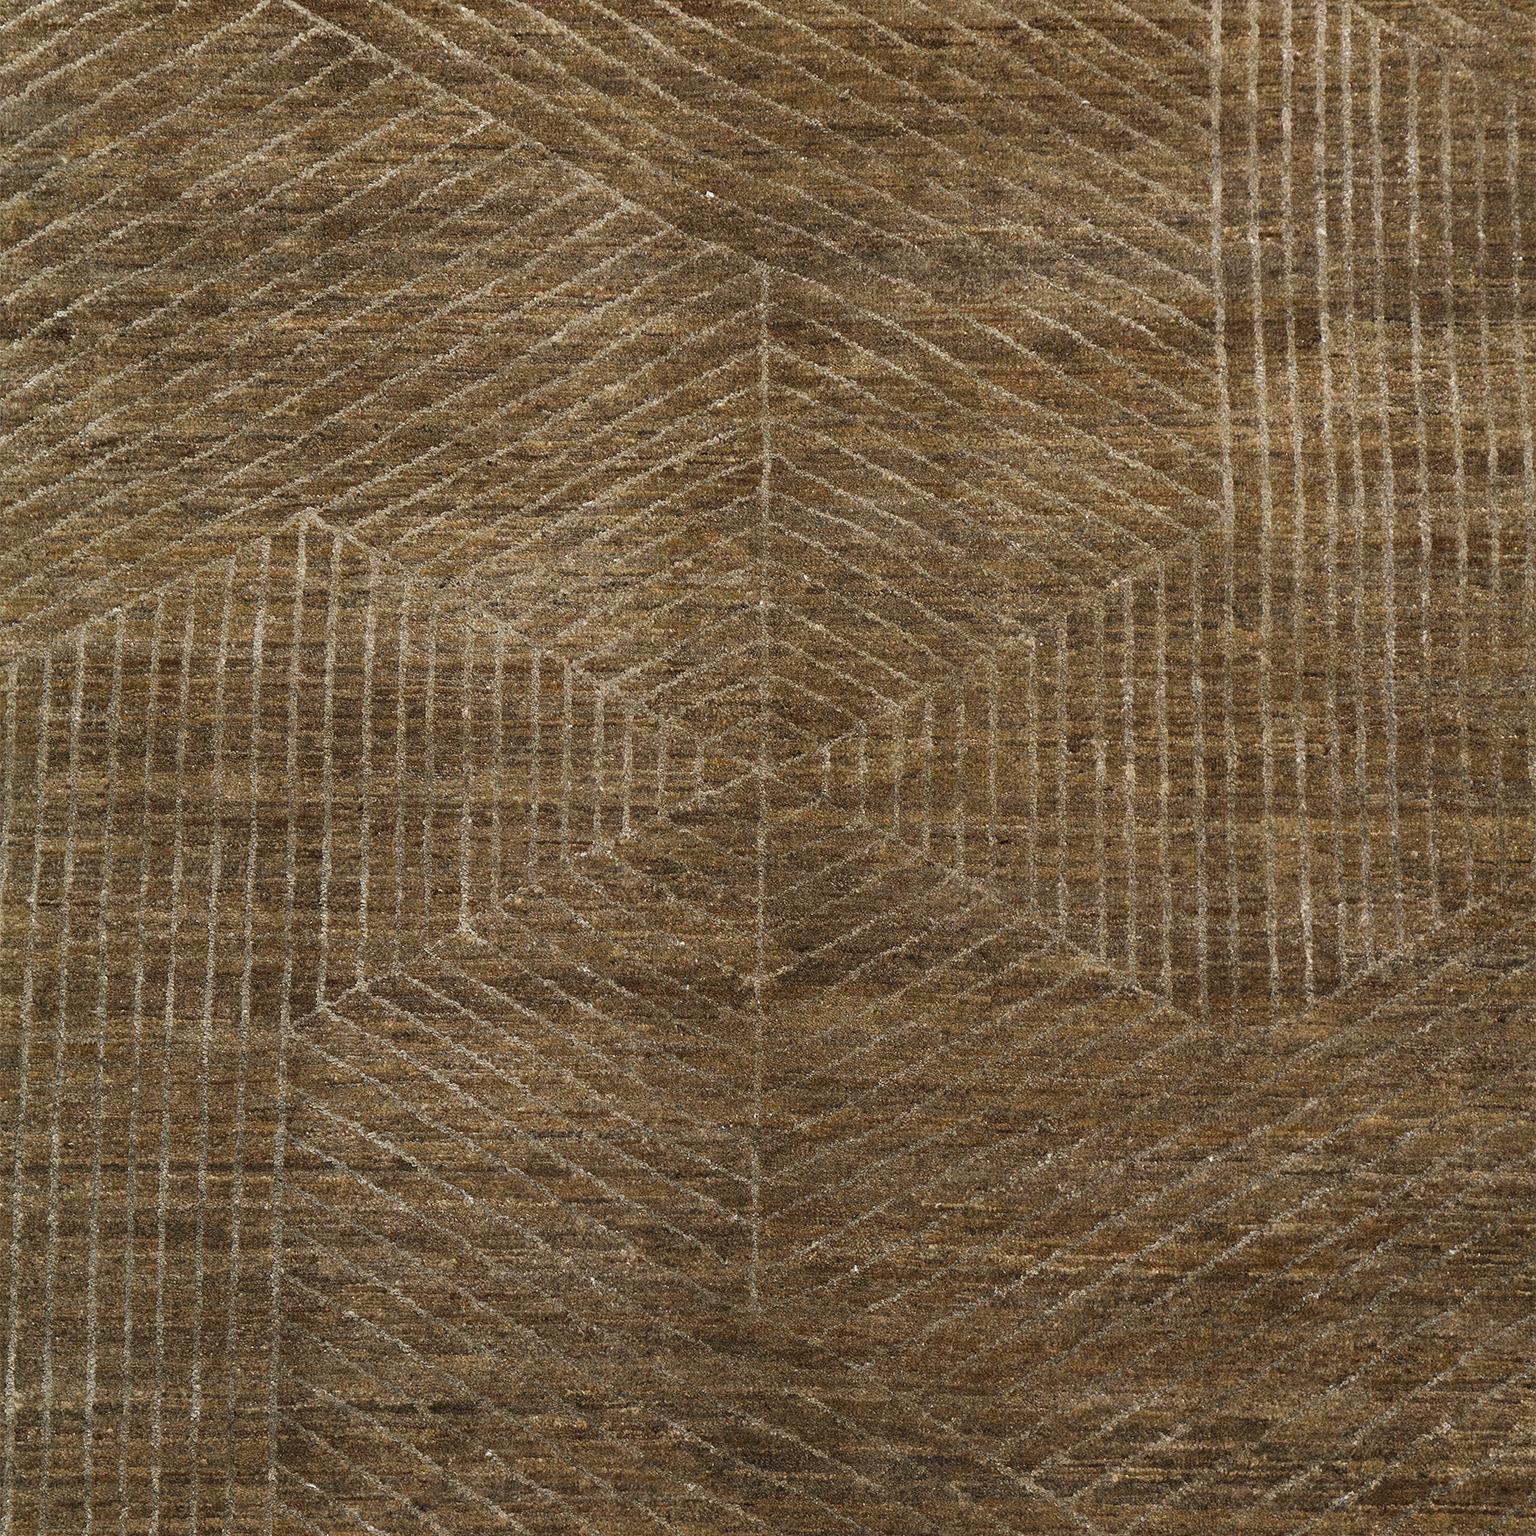 Sink your feet into this Orley Shabahang signature carpet in handspun wool, silkand organic vegetable dyes. Titled Khesh, this carpet from our limited series Mosaic Collection is exceptional in brown wool and undyed cream silk. The intricate